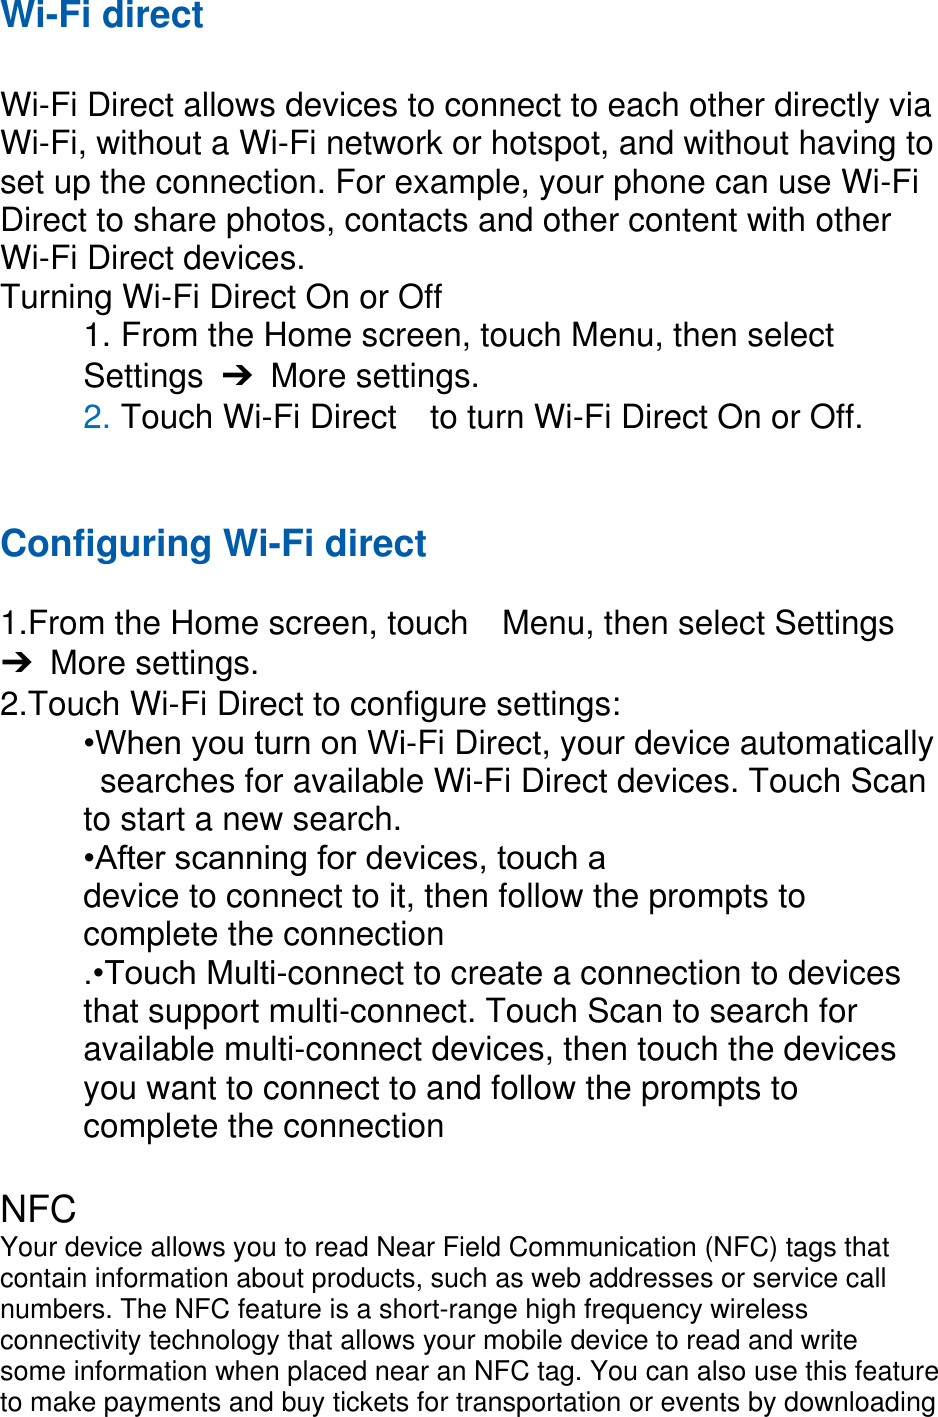 Wi-Fi direct  Wi-Fi Direct allows devices to connect to each other directly via Wi-Fi, without a Wi-Fi network or hotspot, and without having to set up the connection. For example, your phone can use Wi-Fi Direct to share photos, contacts and other content with other Wi-Fi Direct devices.   Turning Wi-Fi Direct On or Off 1. From the Home screen, touch Menu, then select   Settings  ➔  More settings. 2. Touch Wi-Fi Direct    to turn Wi-Fi Direct On or Off.   Configuring Wi-Fi direct    1.From the Home screen, touch    Menu, then select Settings ➔  More settings. 2.Touch Wi-Fi Direct to configure settings:   •When you turn on Wi-Fi Direct, your device automatically   searches for available Wi-Fi Direct devices. Touch Scan   to start a new search. •After scanning for devices, touch a   device to connect to it, then follow the prompts to   complete the connection .•Touch Multi-connect to create a connection to devices that support multi-connect. Touch Scan to search for available multi-connect devices, then touch the devices you want to connect to and follow the prompts to complete the connection    NFC Your device allows you to read Near Field Communication (NFC) tags that contain information about products, such as web addresses or service call numbers. The NFC feature is a short-range high frequency wireless connectivity technology that allows your mobile device to read and write some information when placed near an NFC tag. You can also use this feature to make payments and buy tickets for transportation or events by downloading 